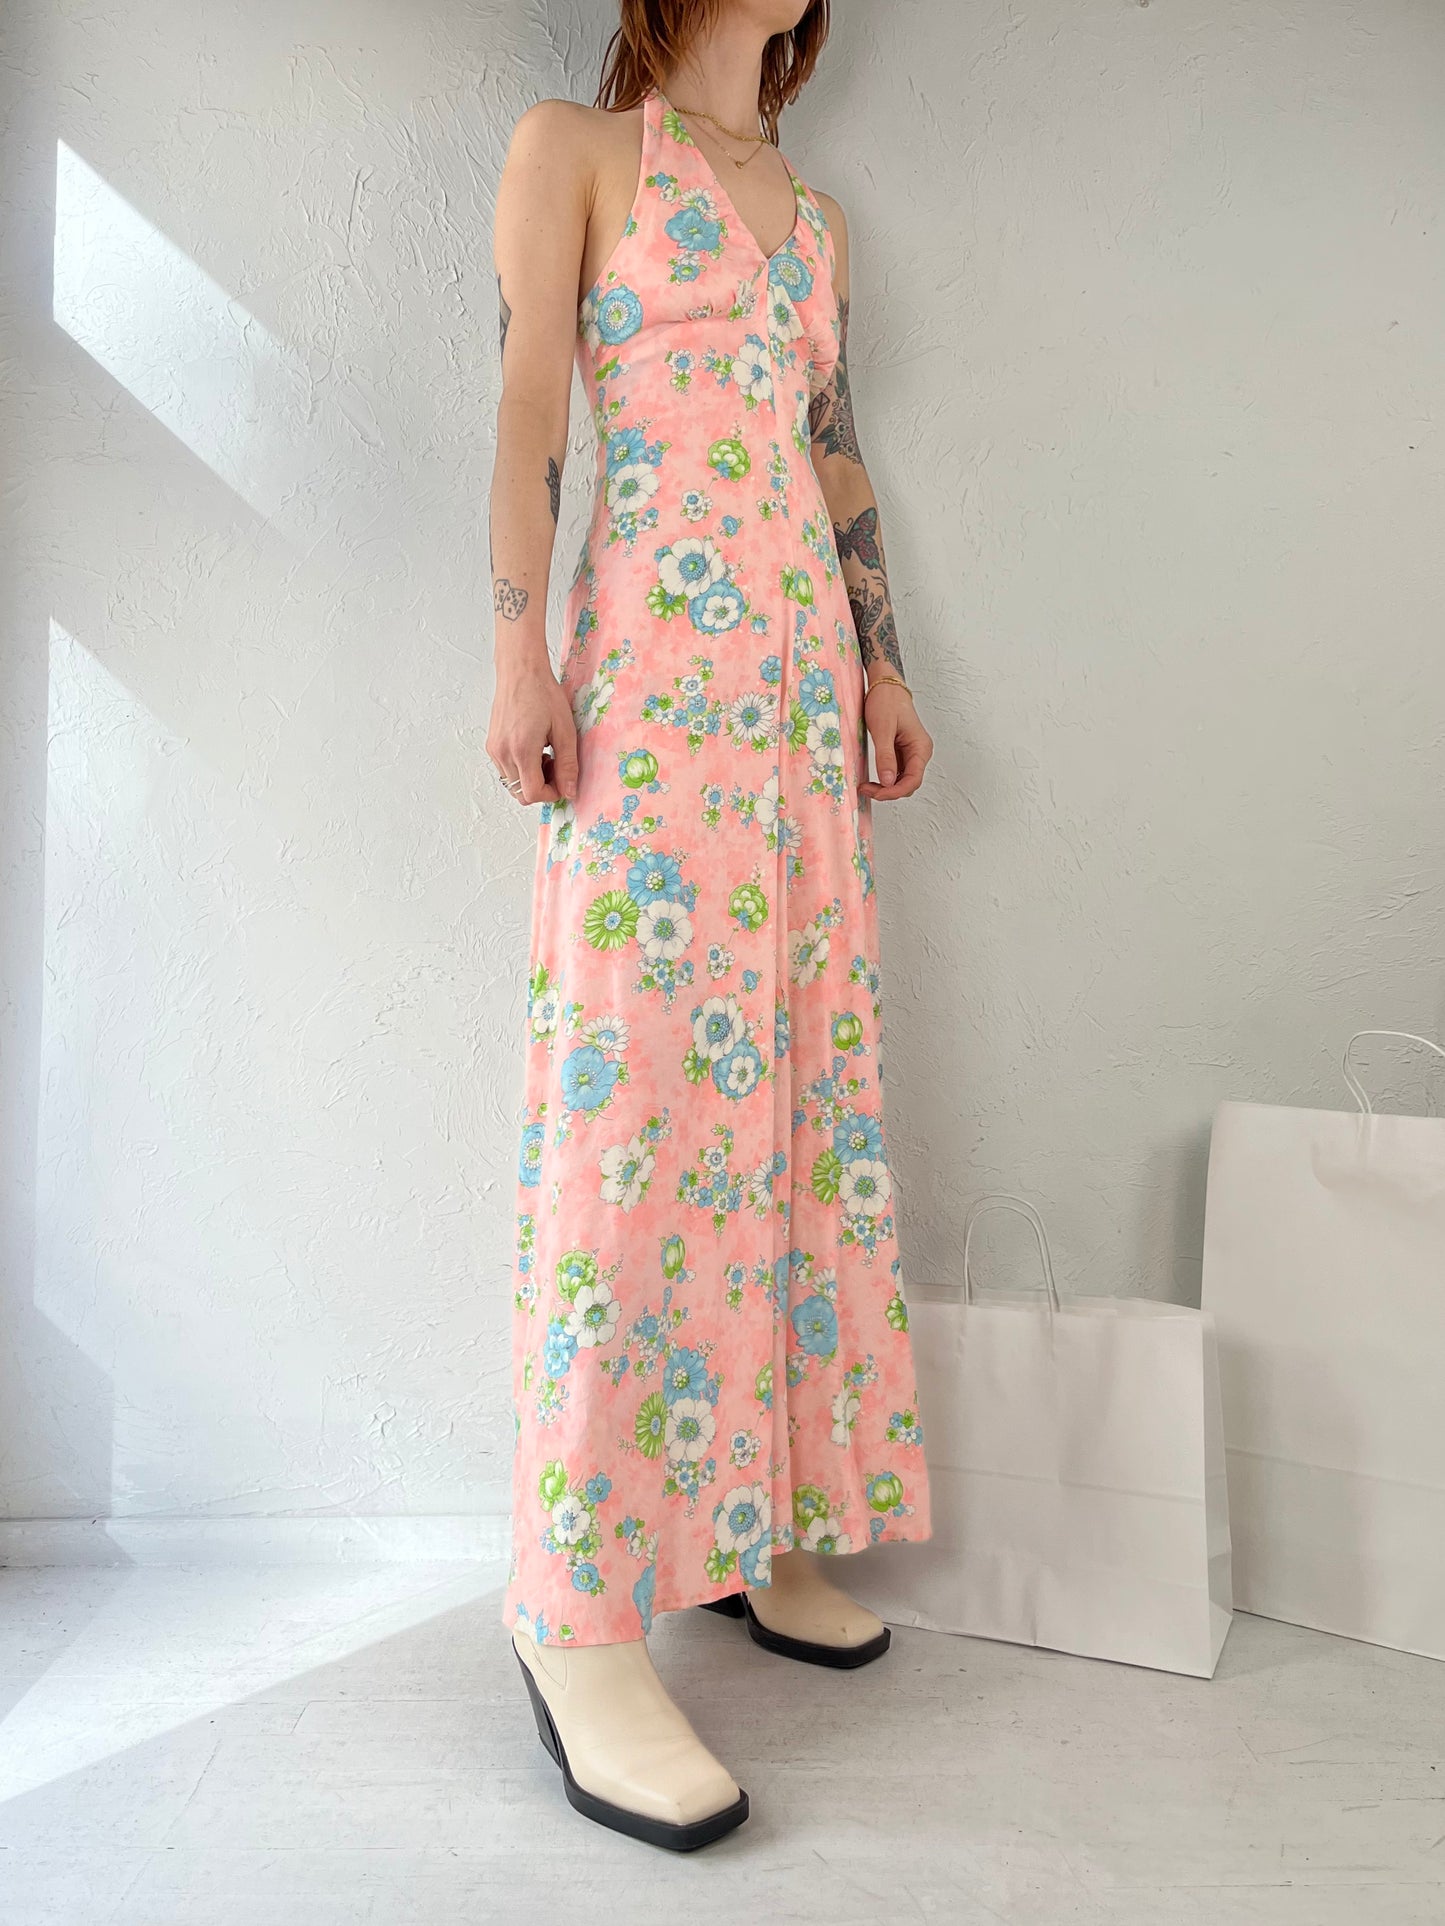 70s Pink Floral Print Halter Dress / Small